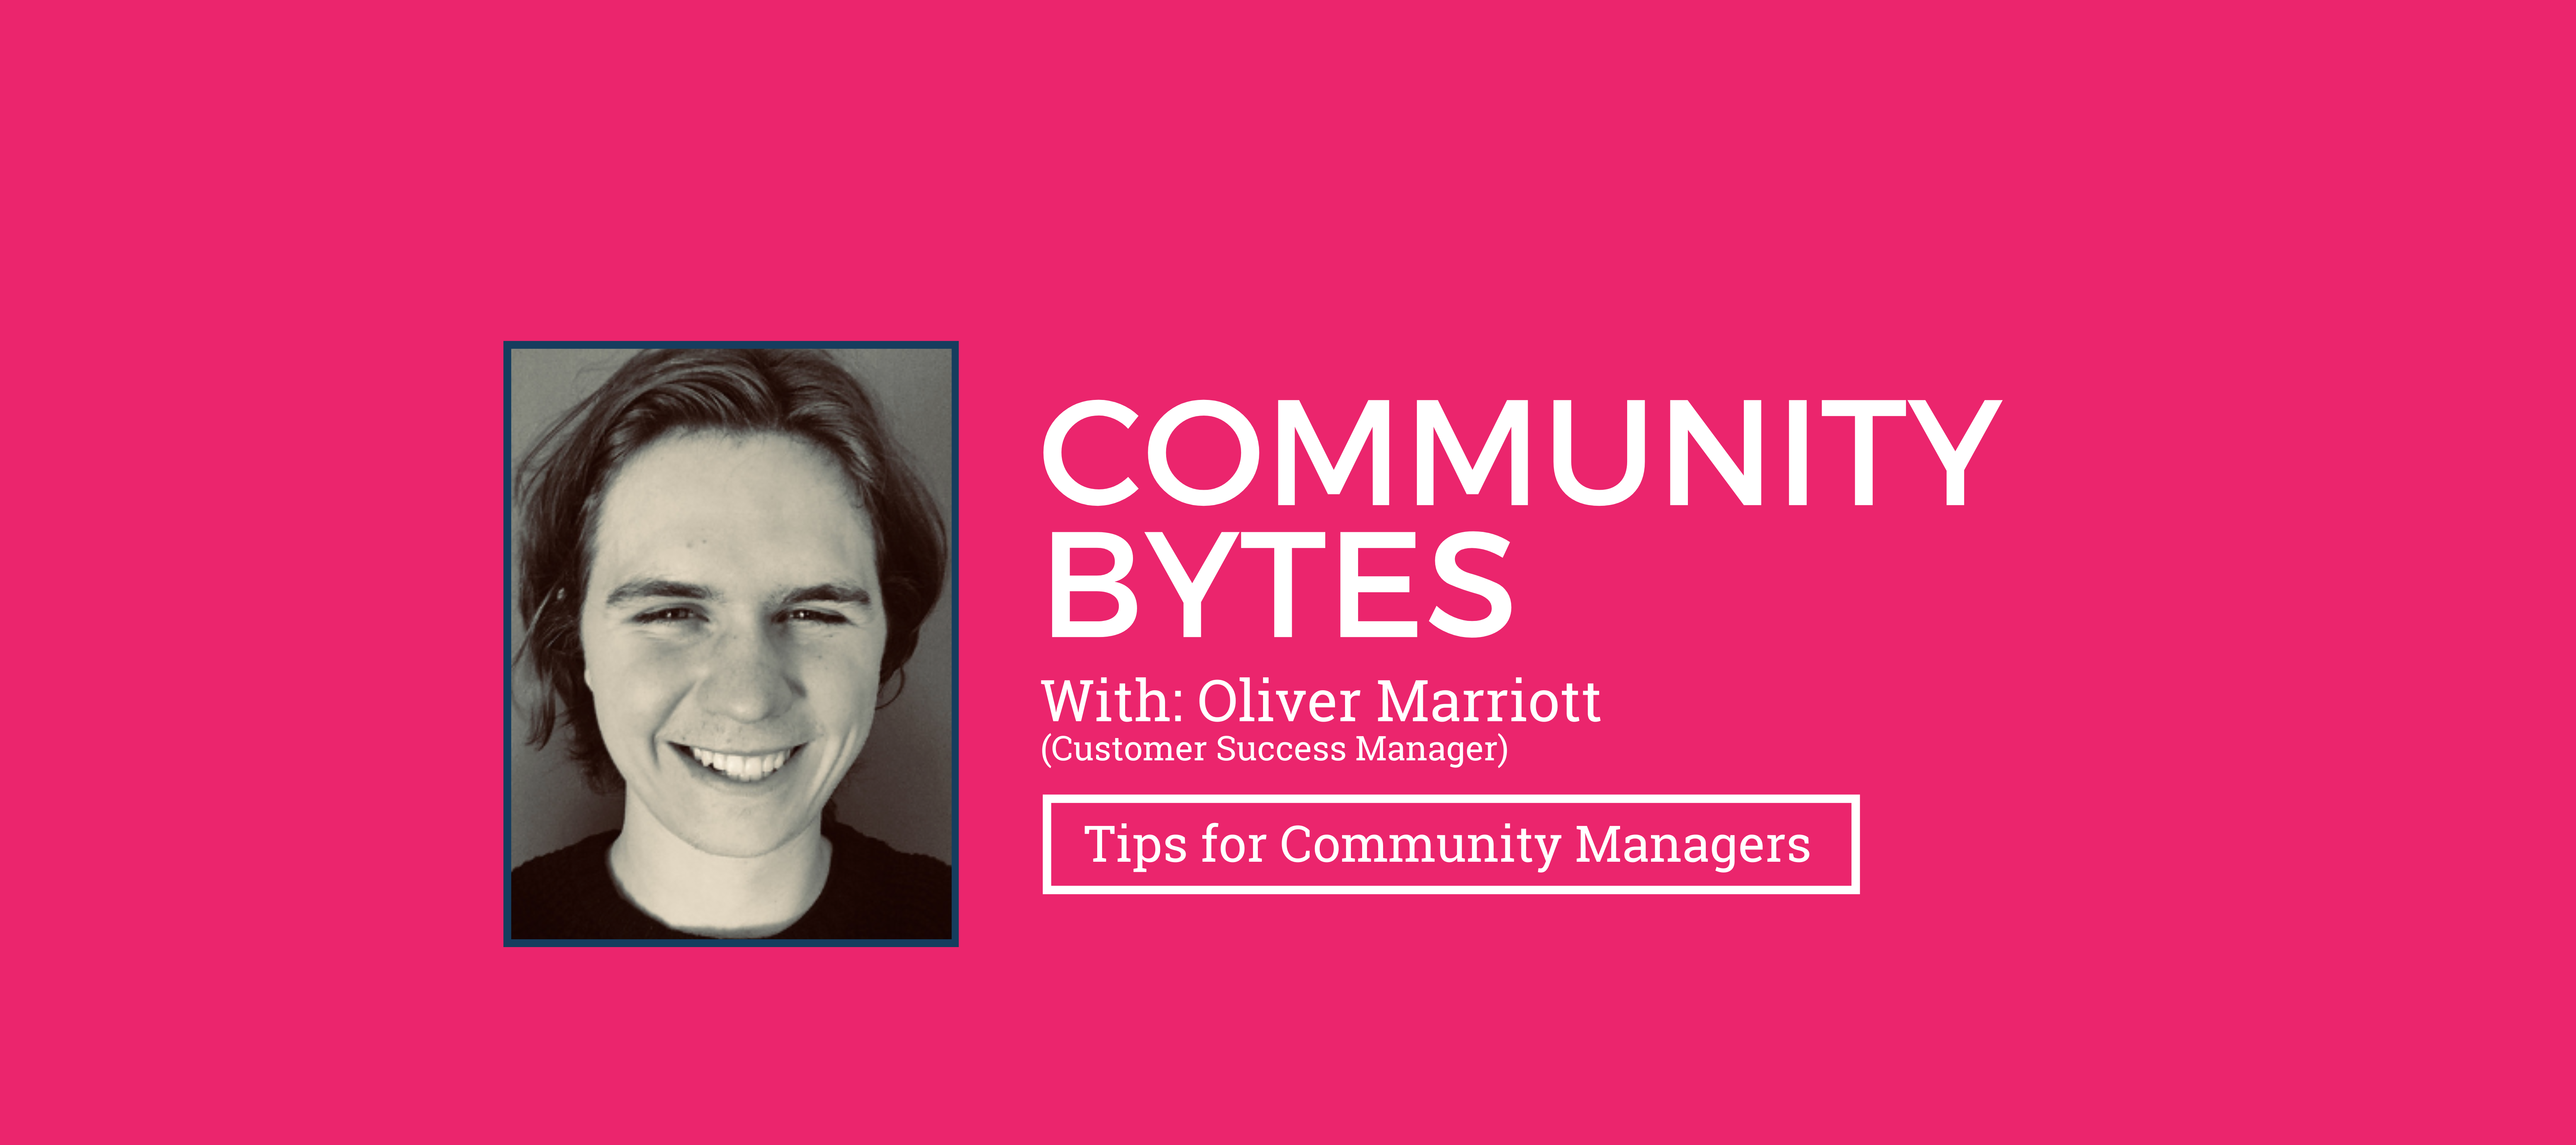 Community Bytes w/ Oliver Marriott: Tips for Community Managers